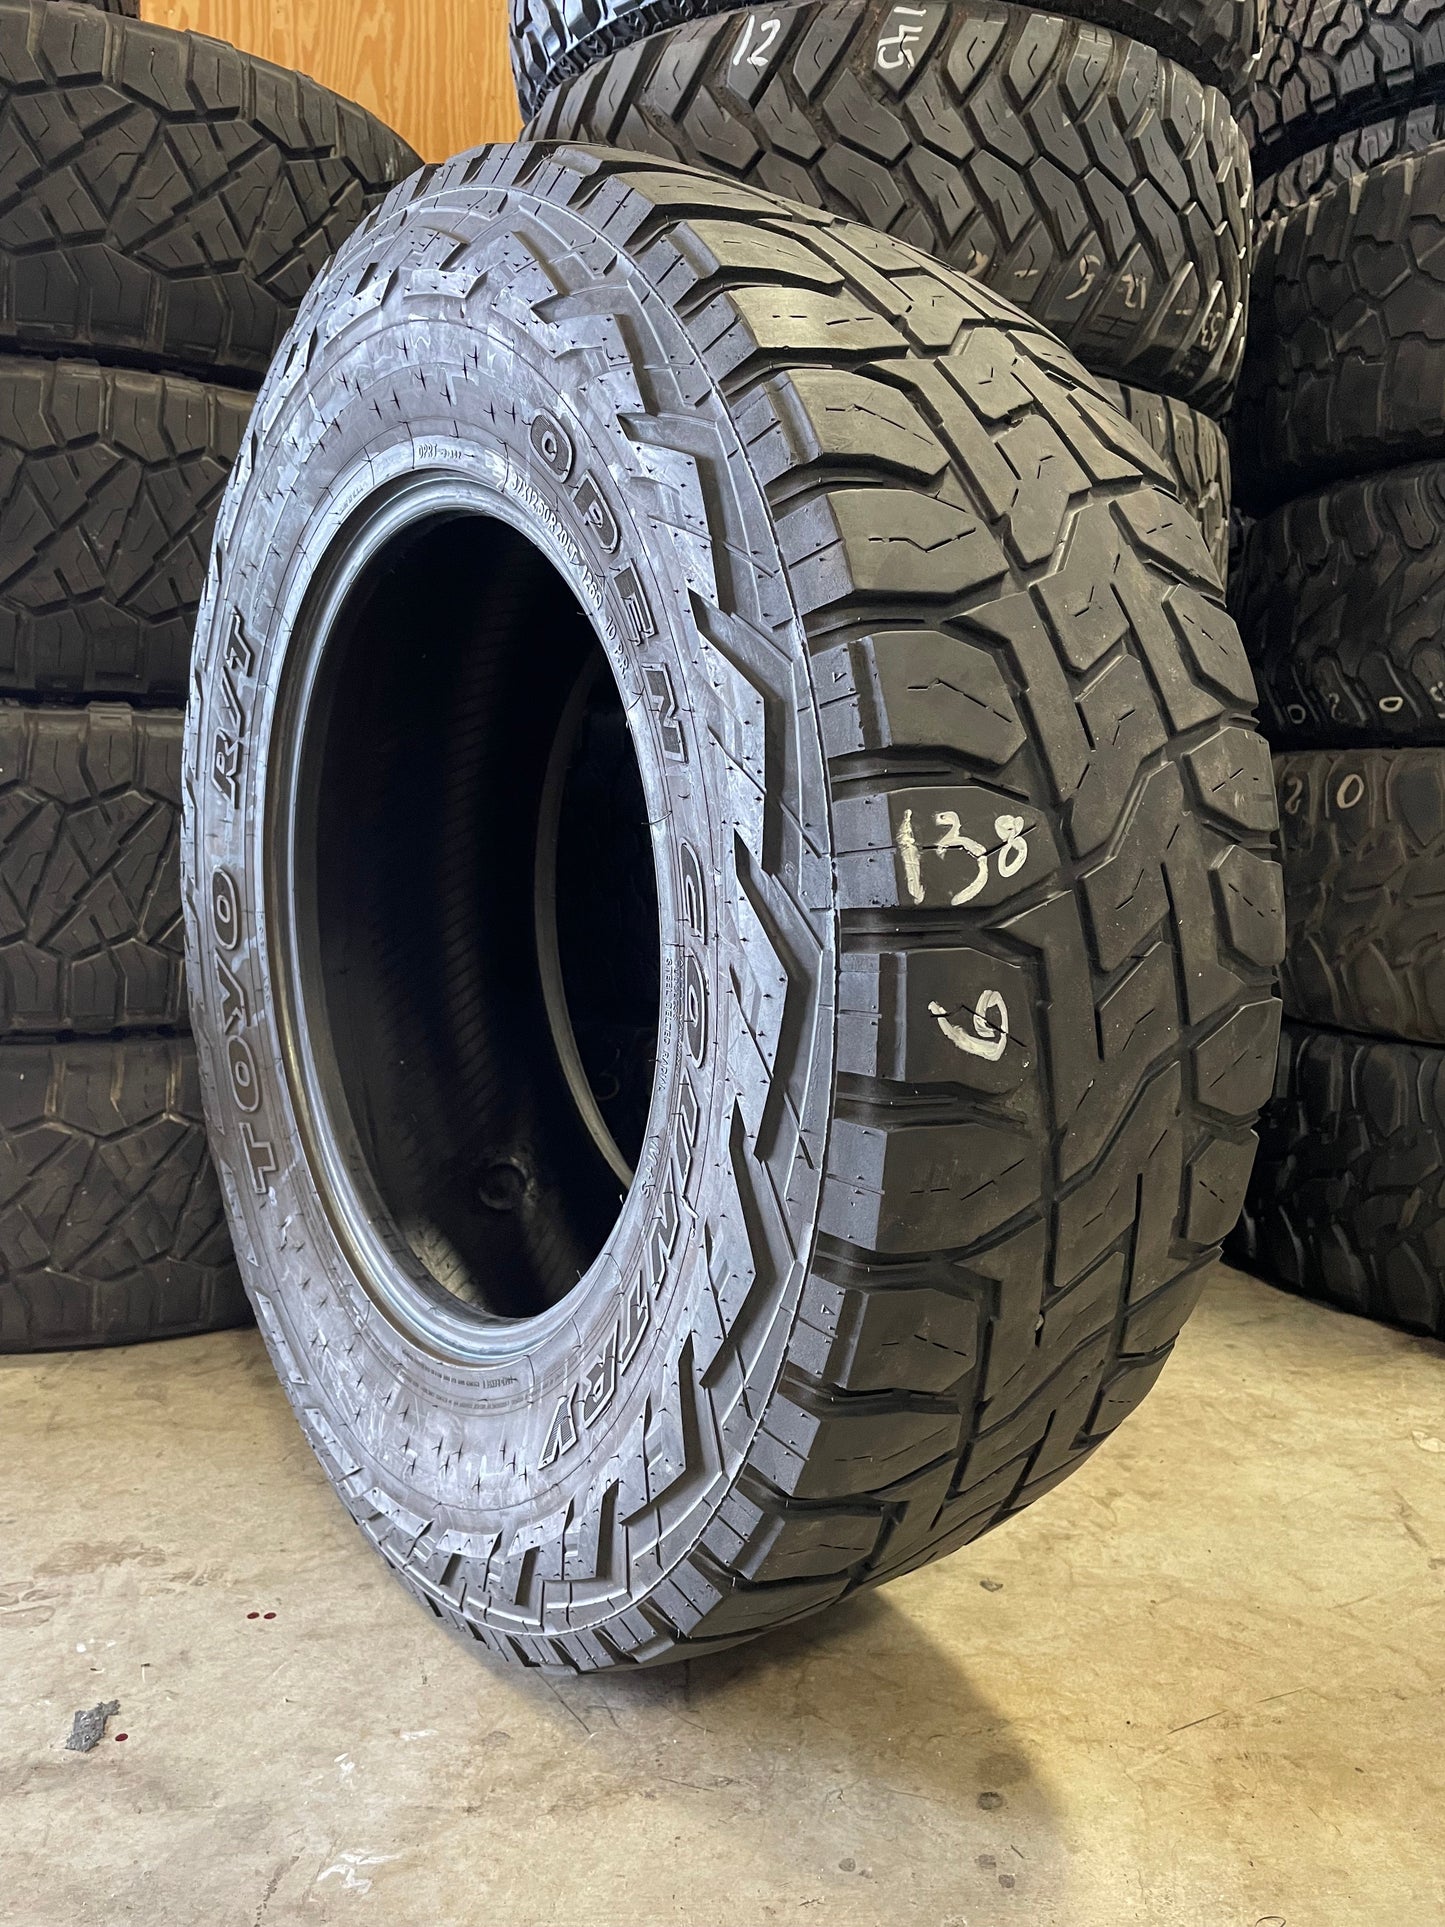 SINGLE 37x12.50R20 Toyo Open Country 126Q E - Used Tires